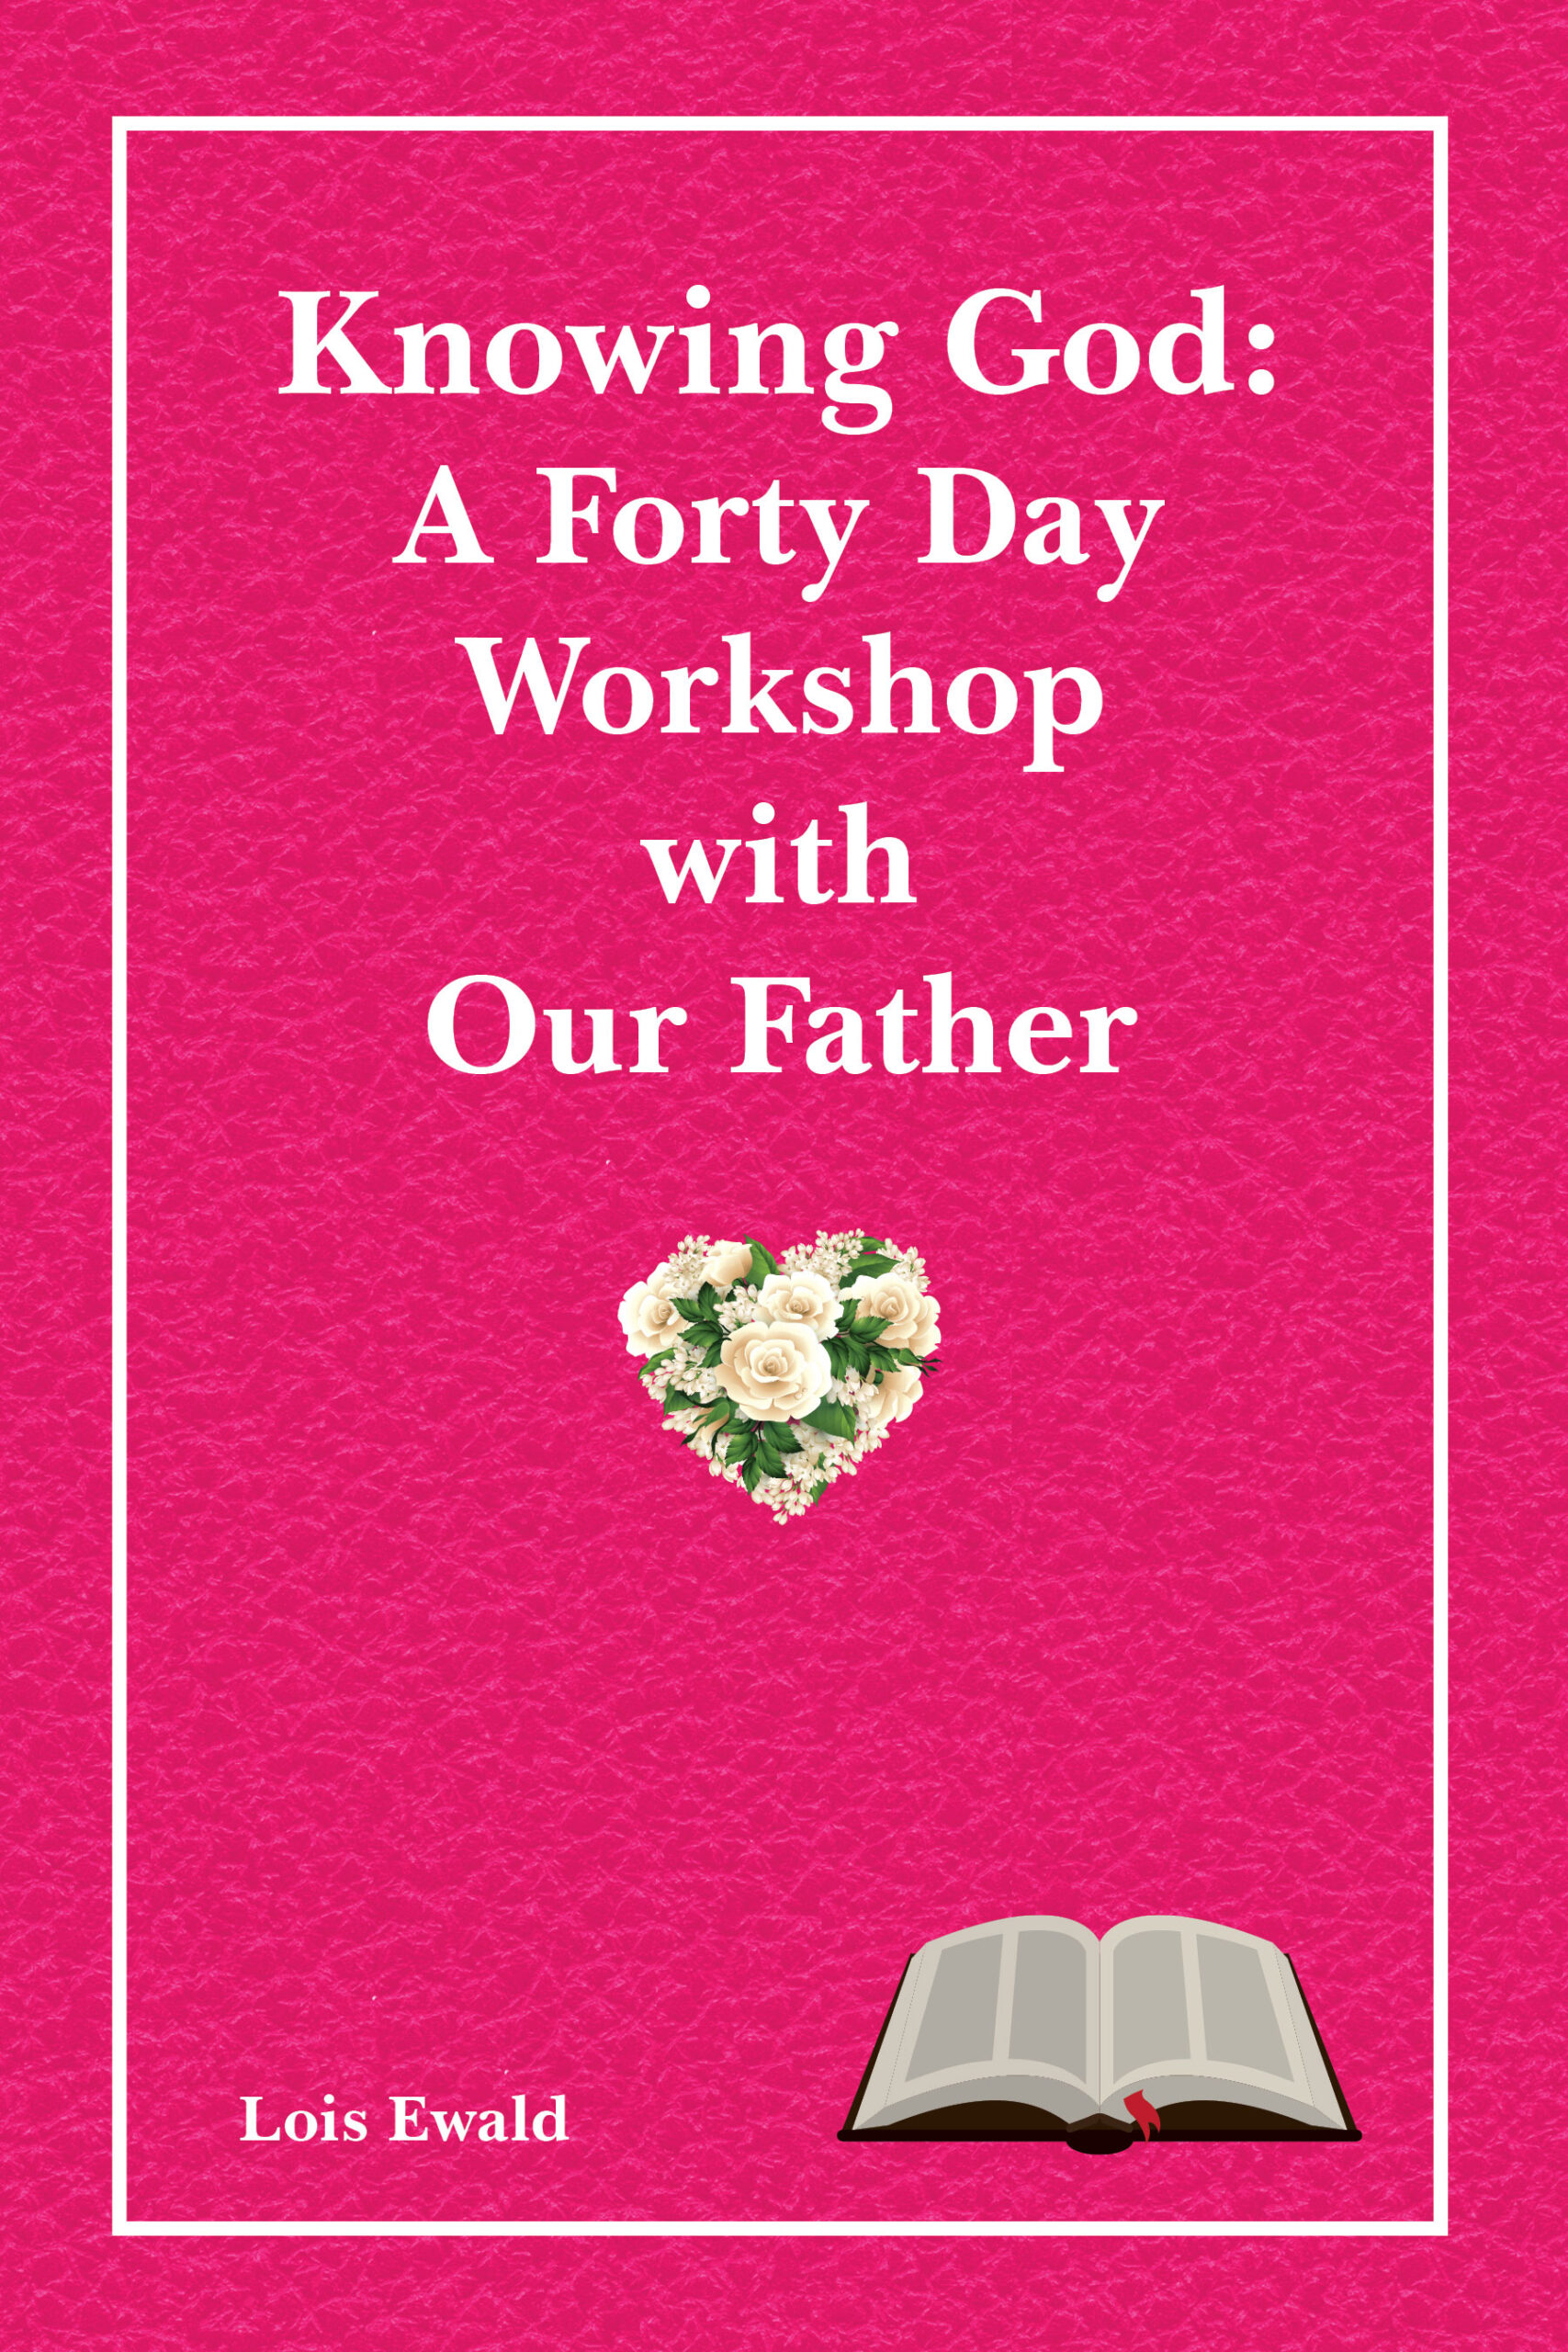 Knowing God: A Forty Day Workshop with Our Father by Lois Ewald